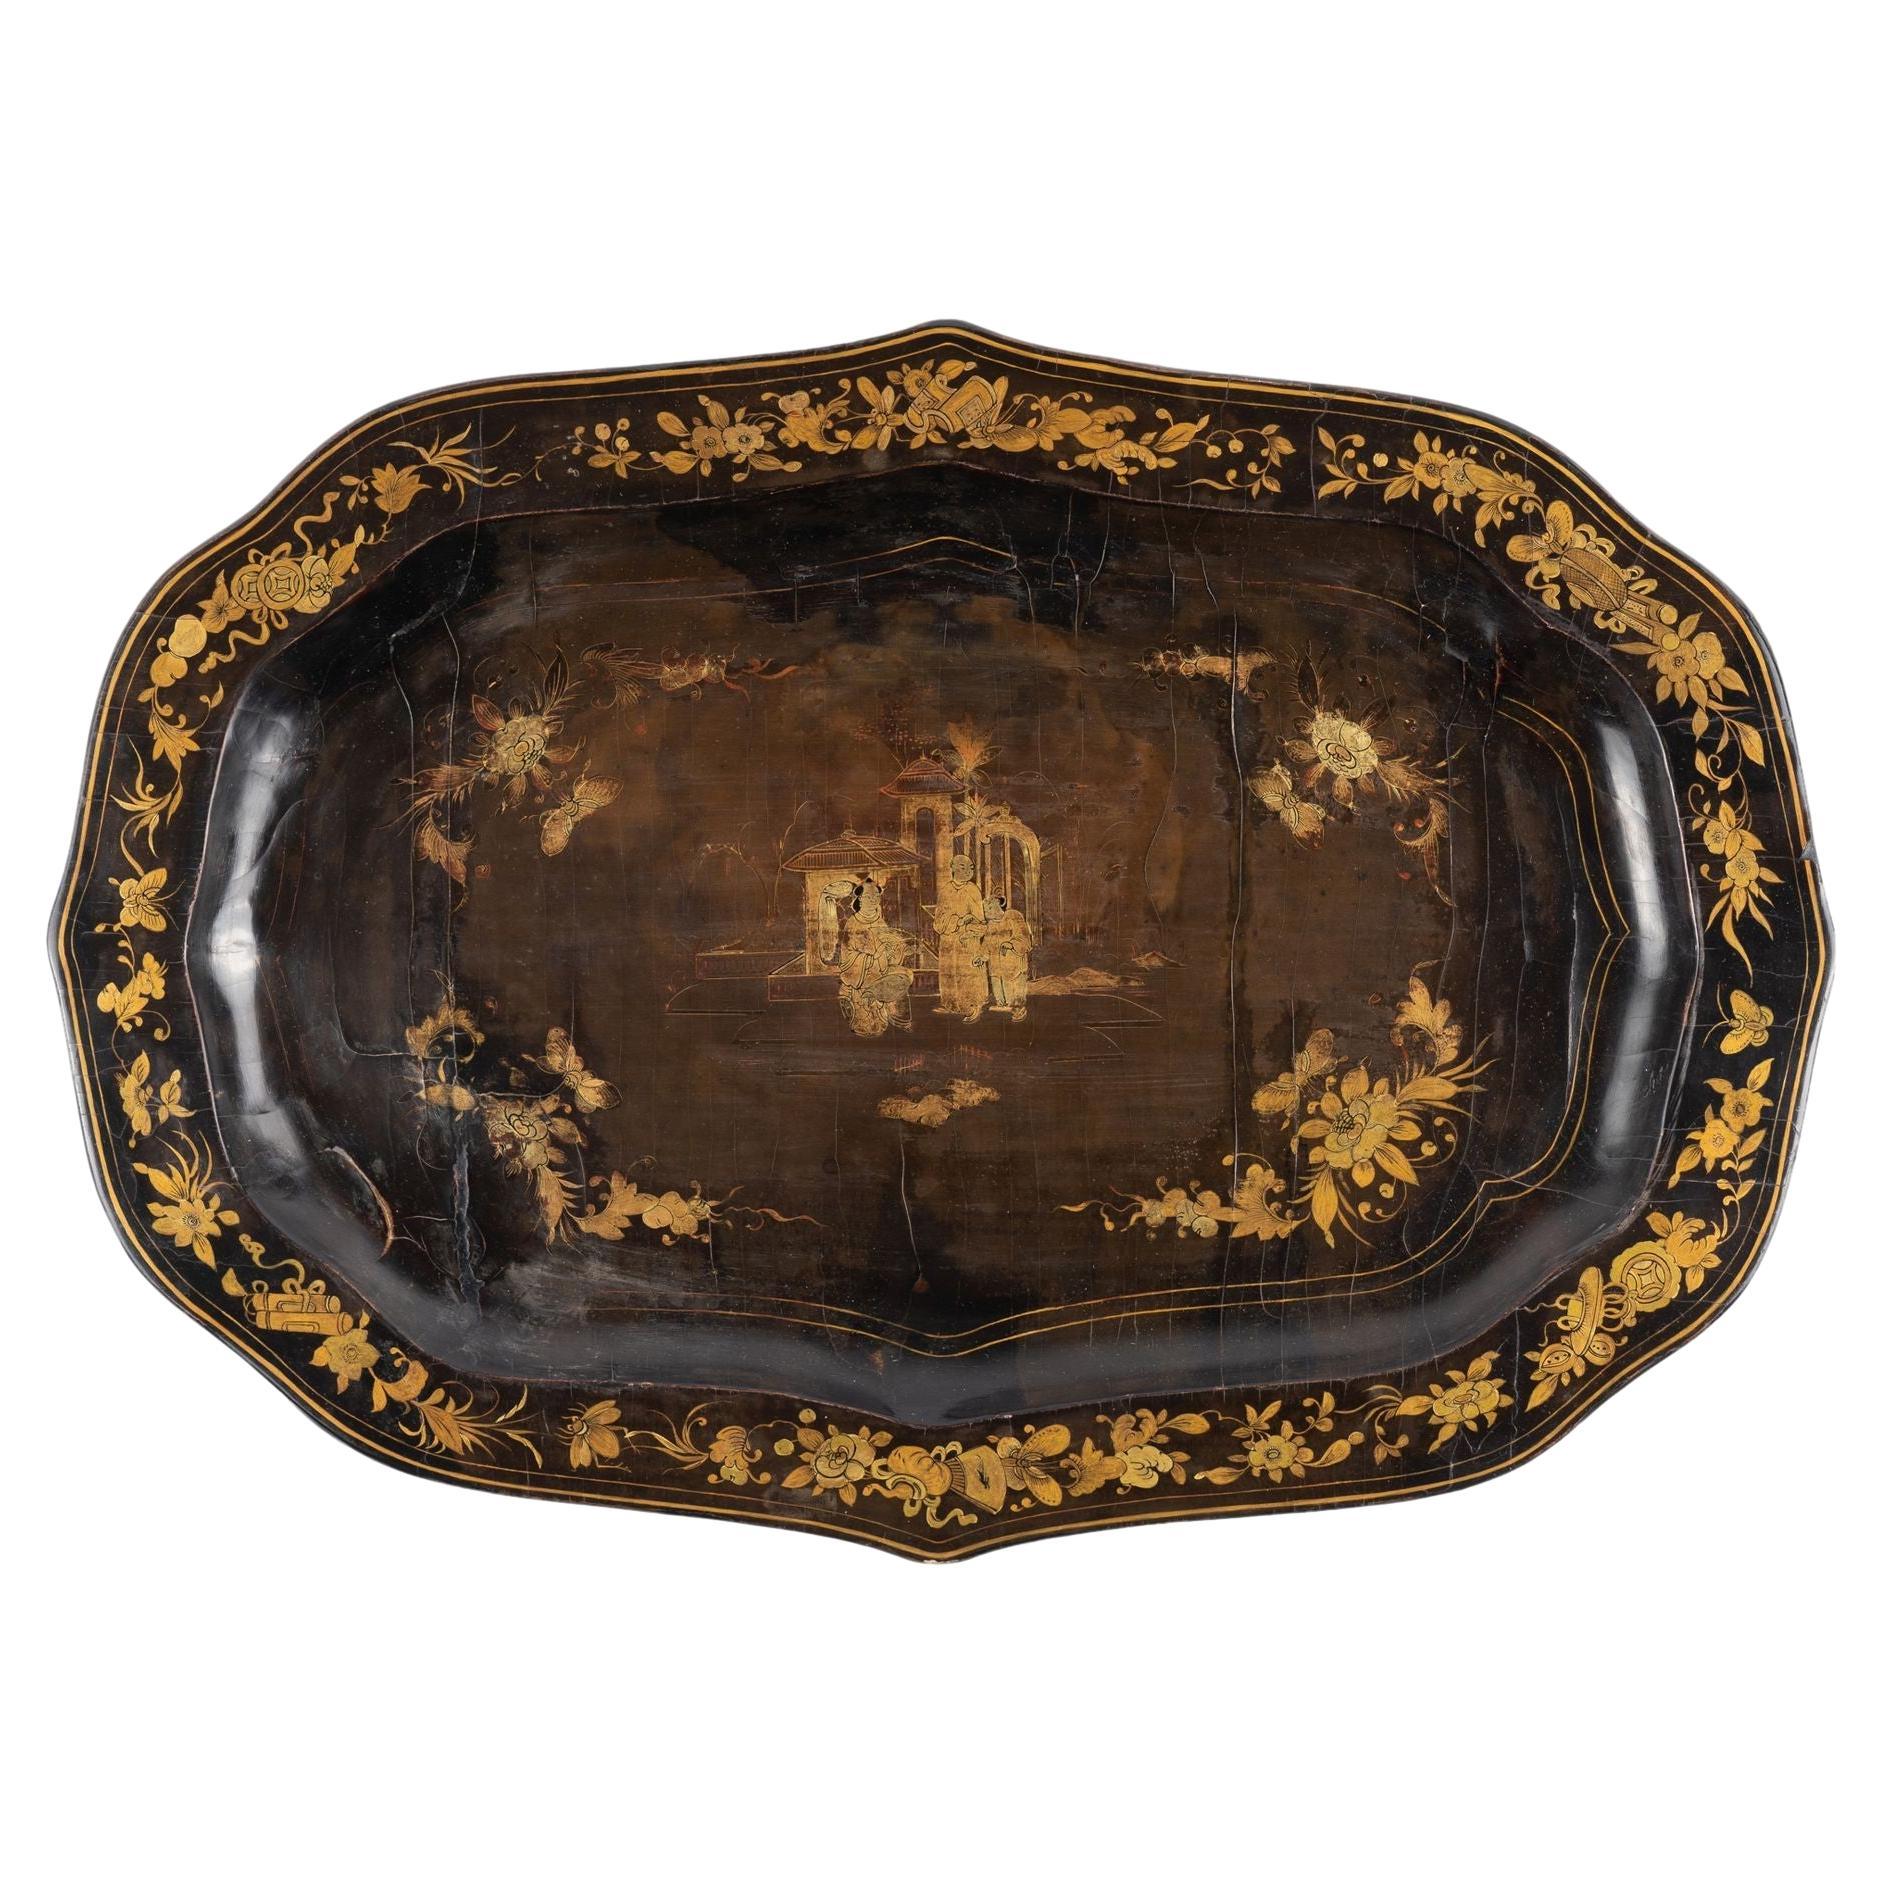 Chinese shaped black lacquer tray with gilt decoration, c. 1825